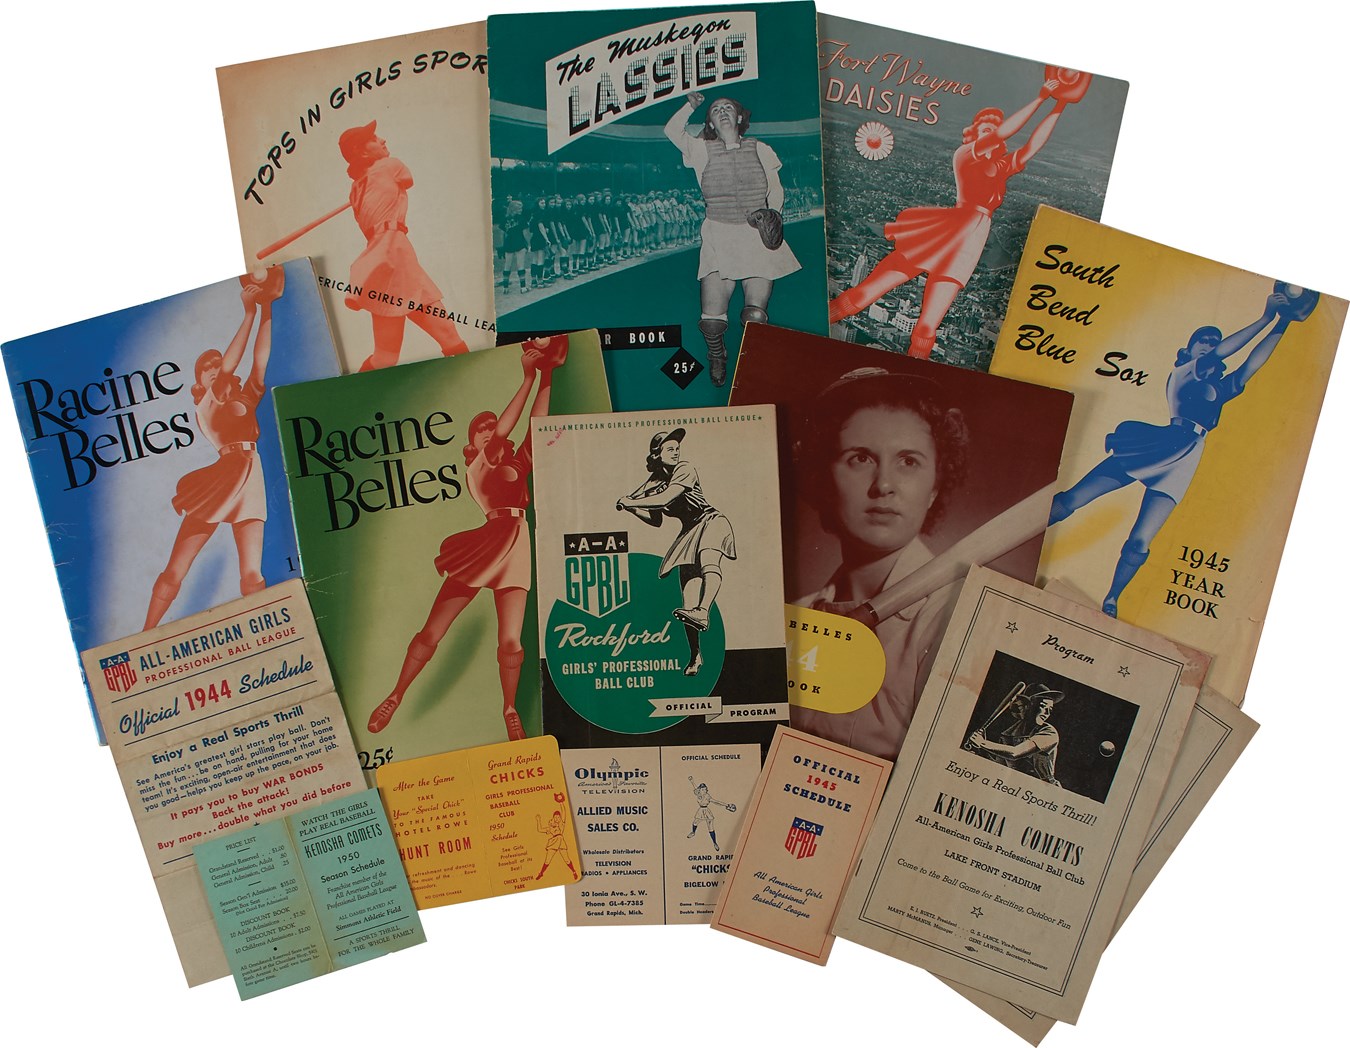 - 1940s All American Girls Professional Baseball League Archive (16)